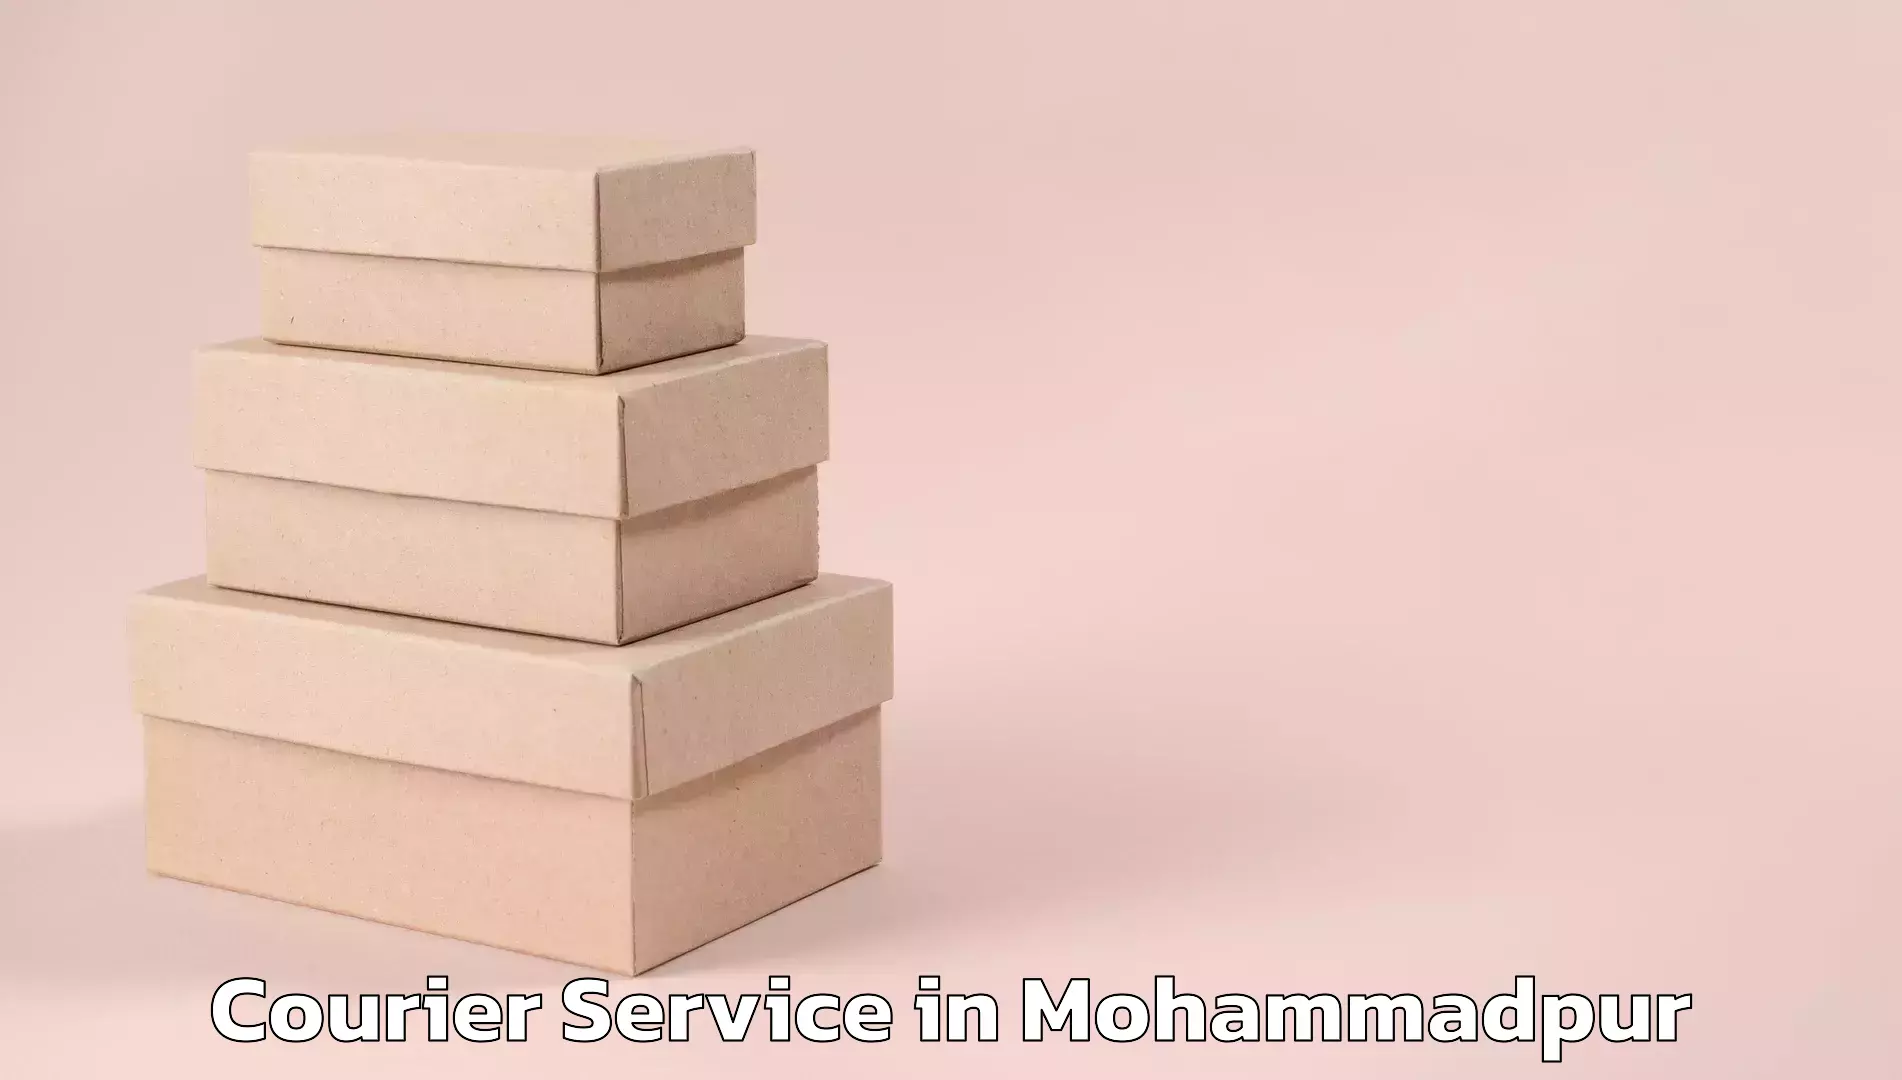 Modern delivery methods in Mohammadpur